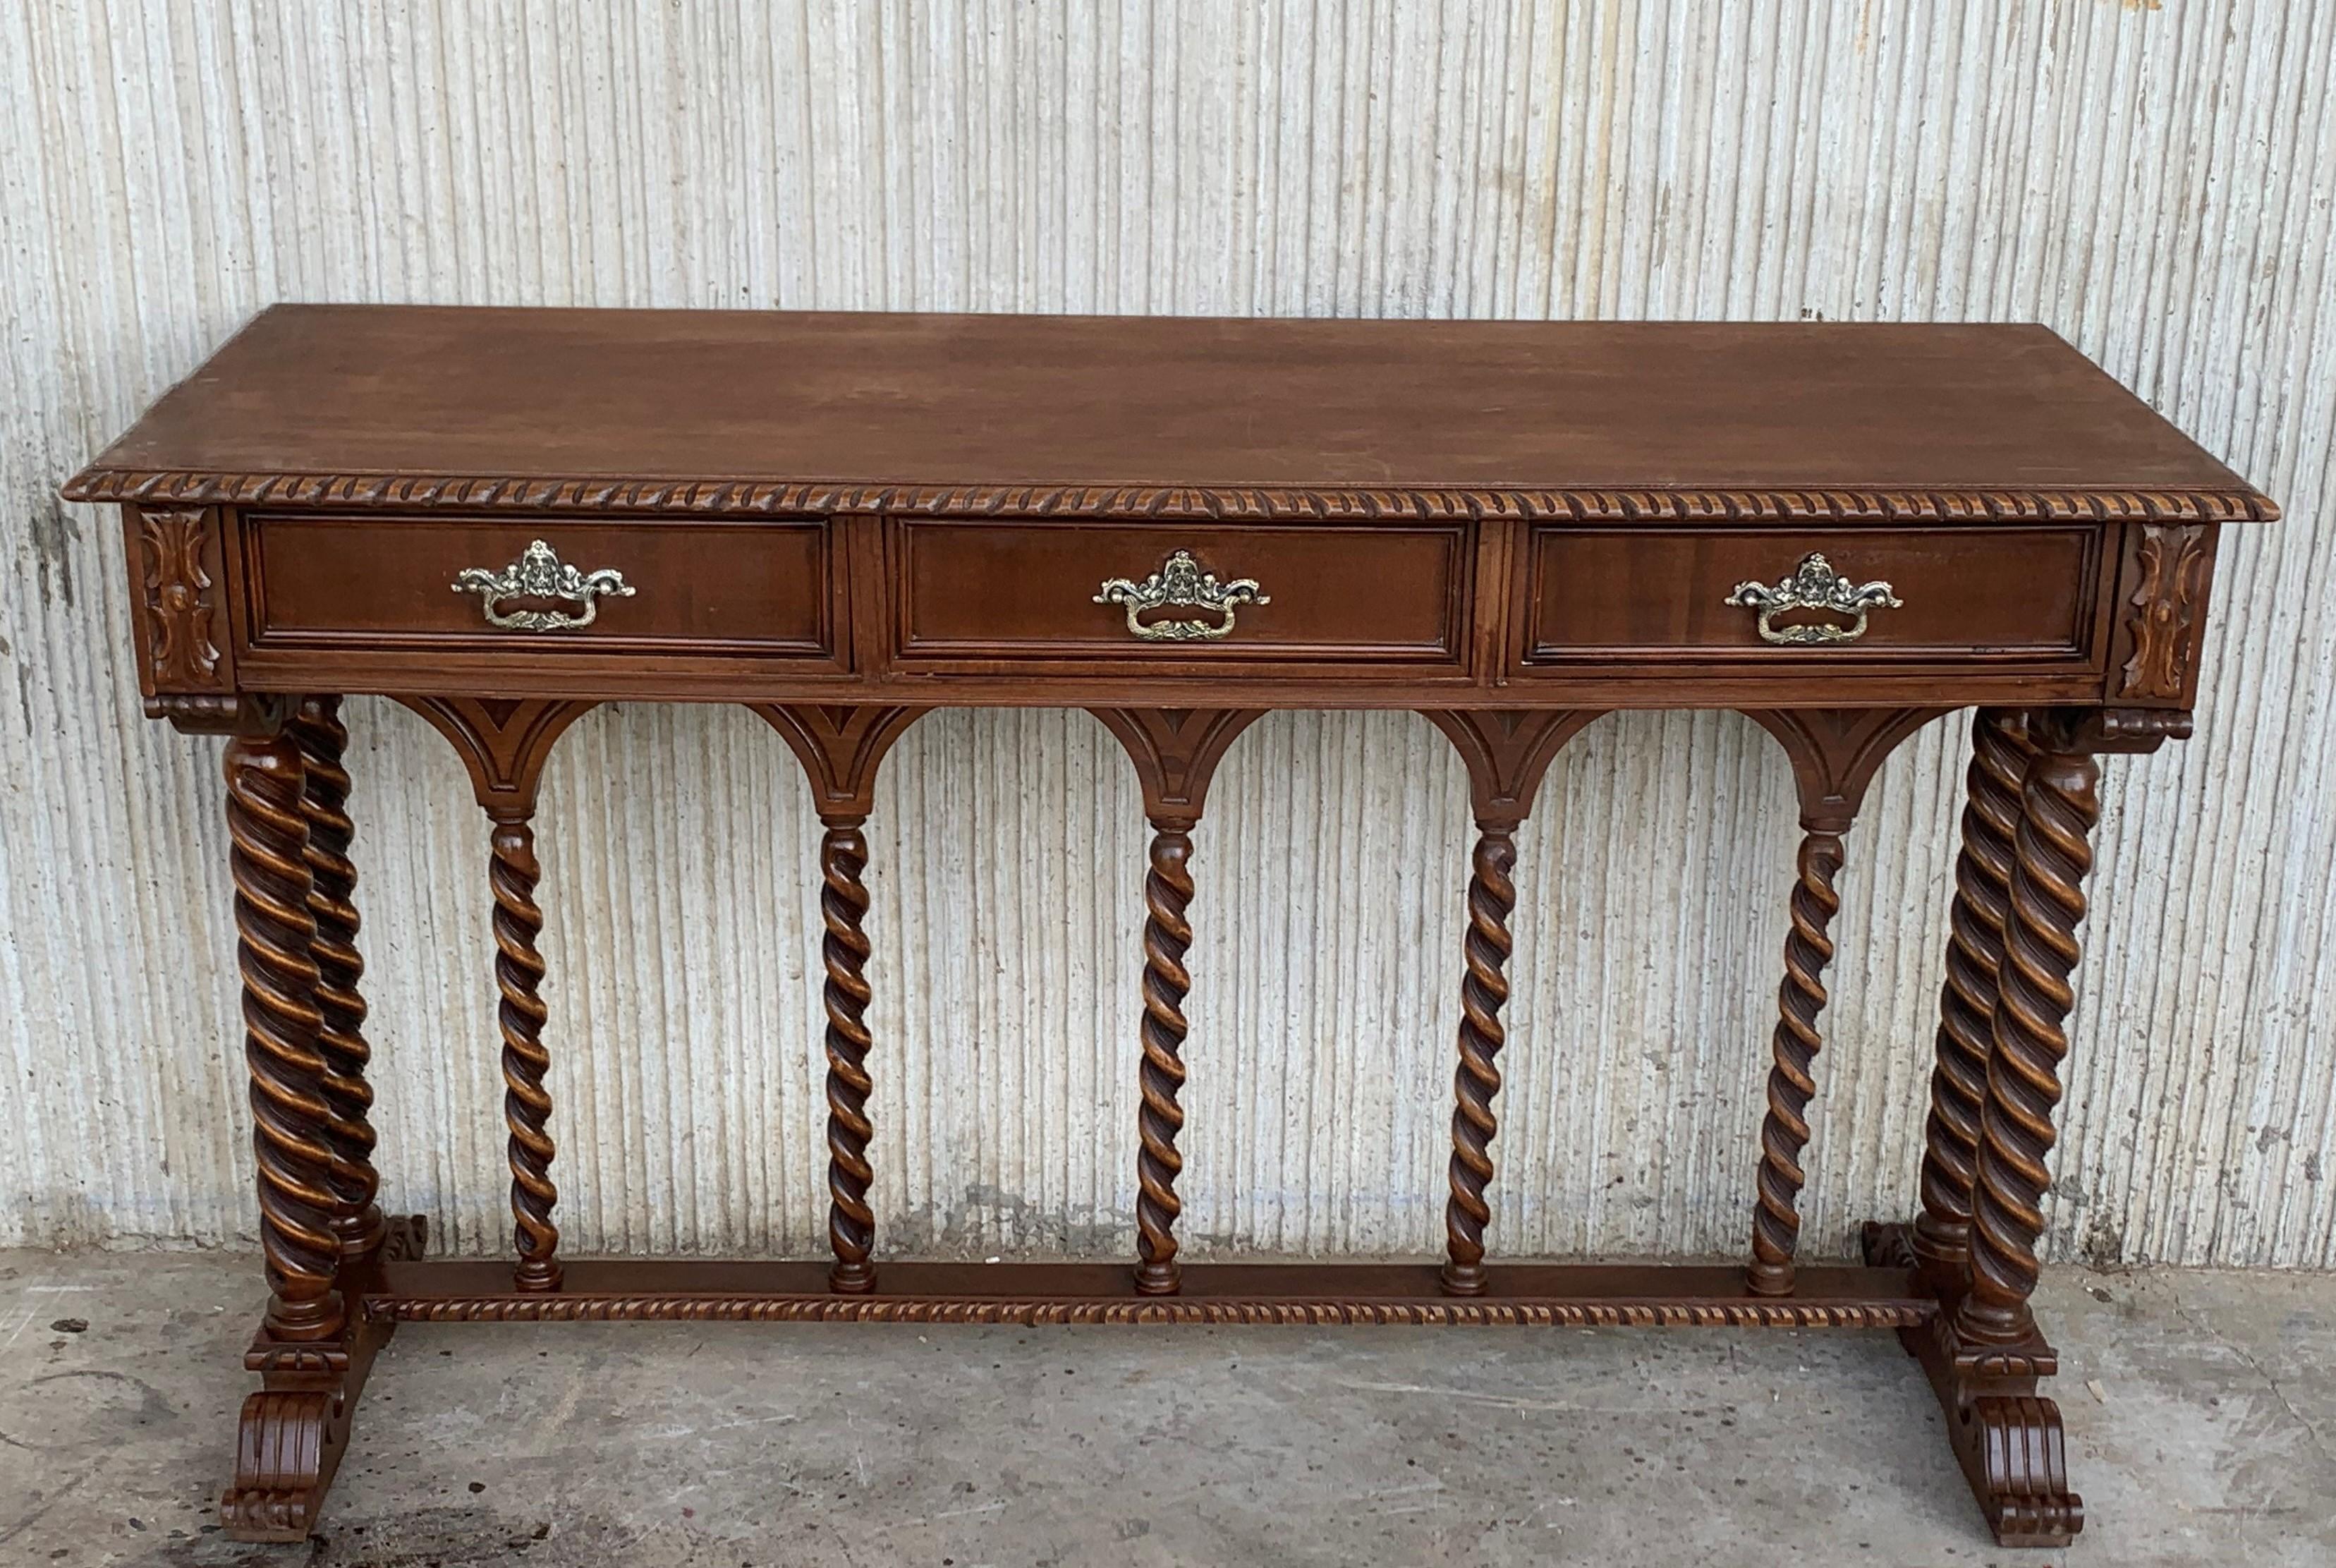 Baroque Spanish Tuscan Console Table with Three Drawers and Solomonic Columns Legs